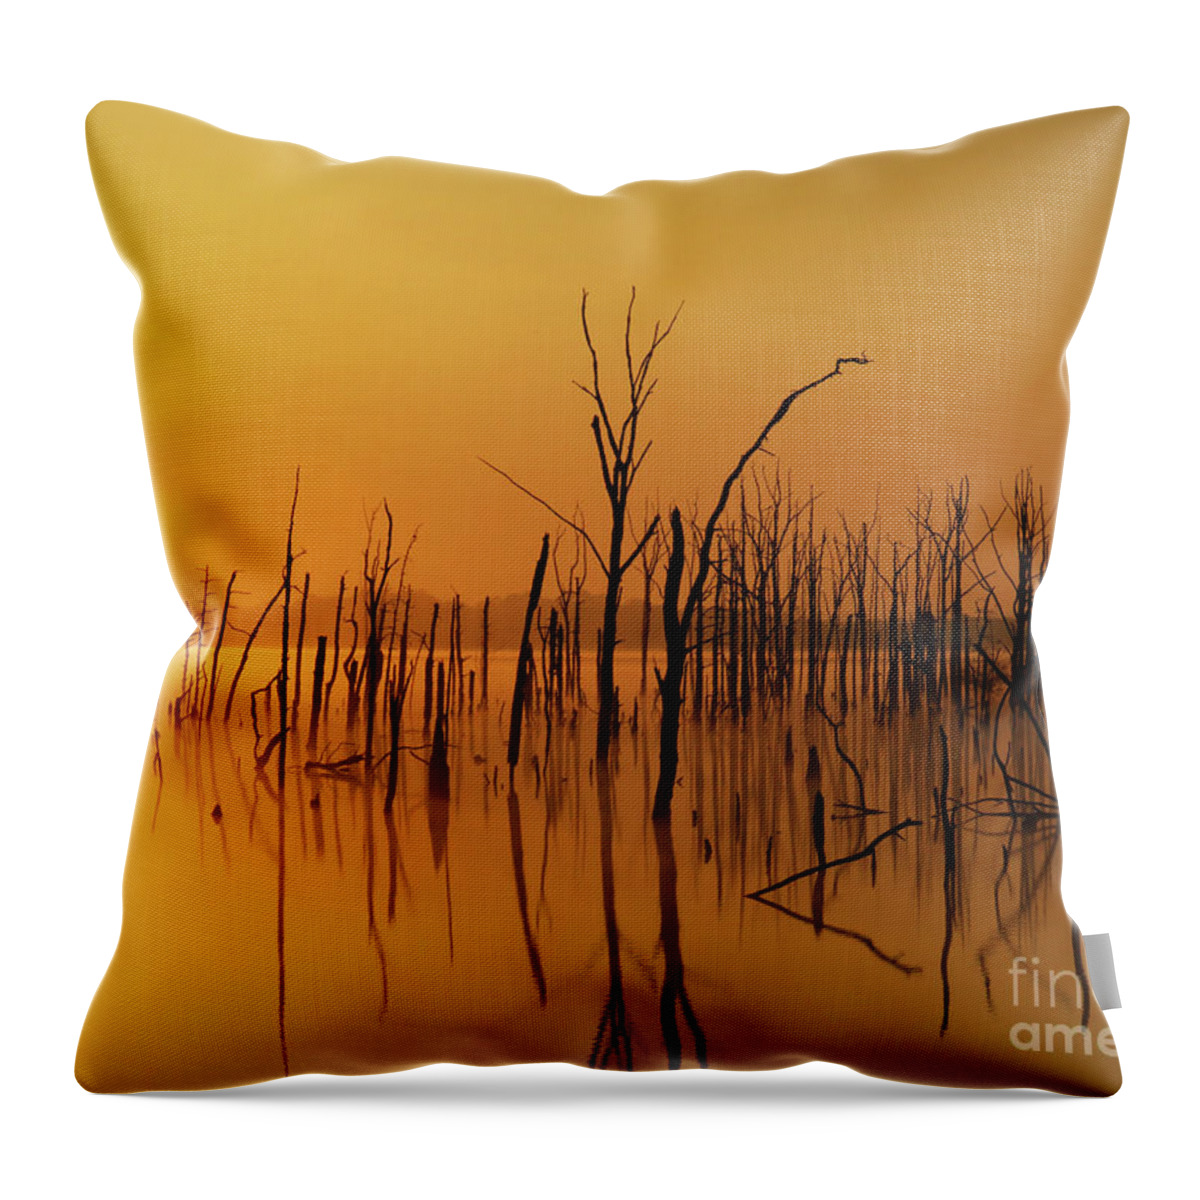 Gold Throw Pillow featuring the photograph Golden Reflections by Roger Becker